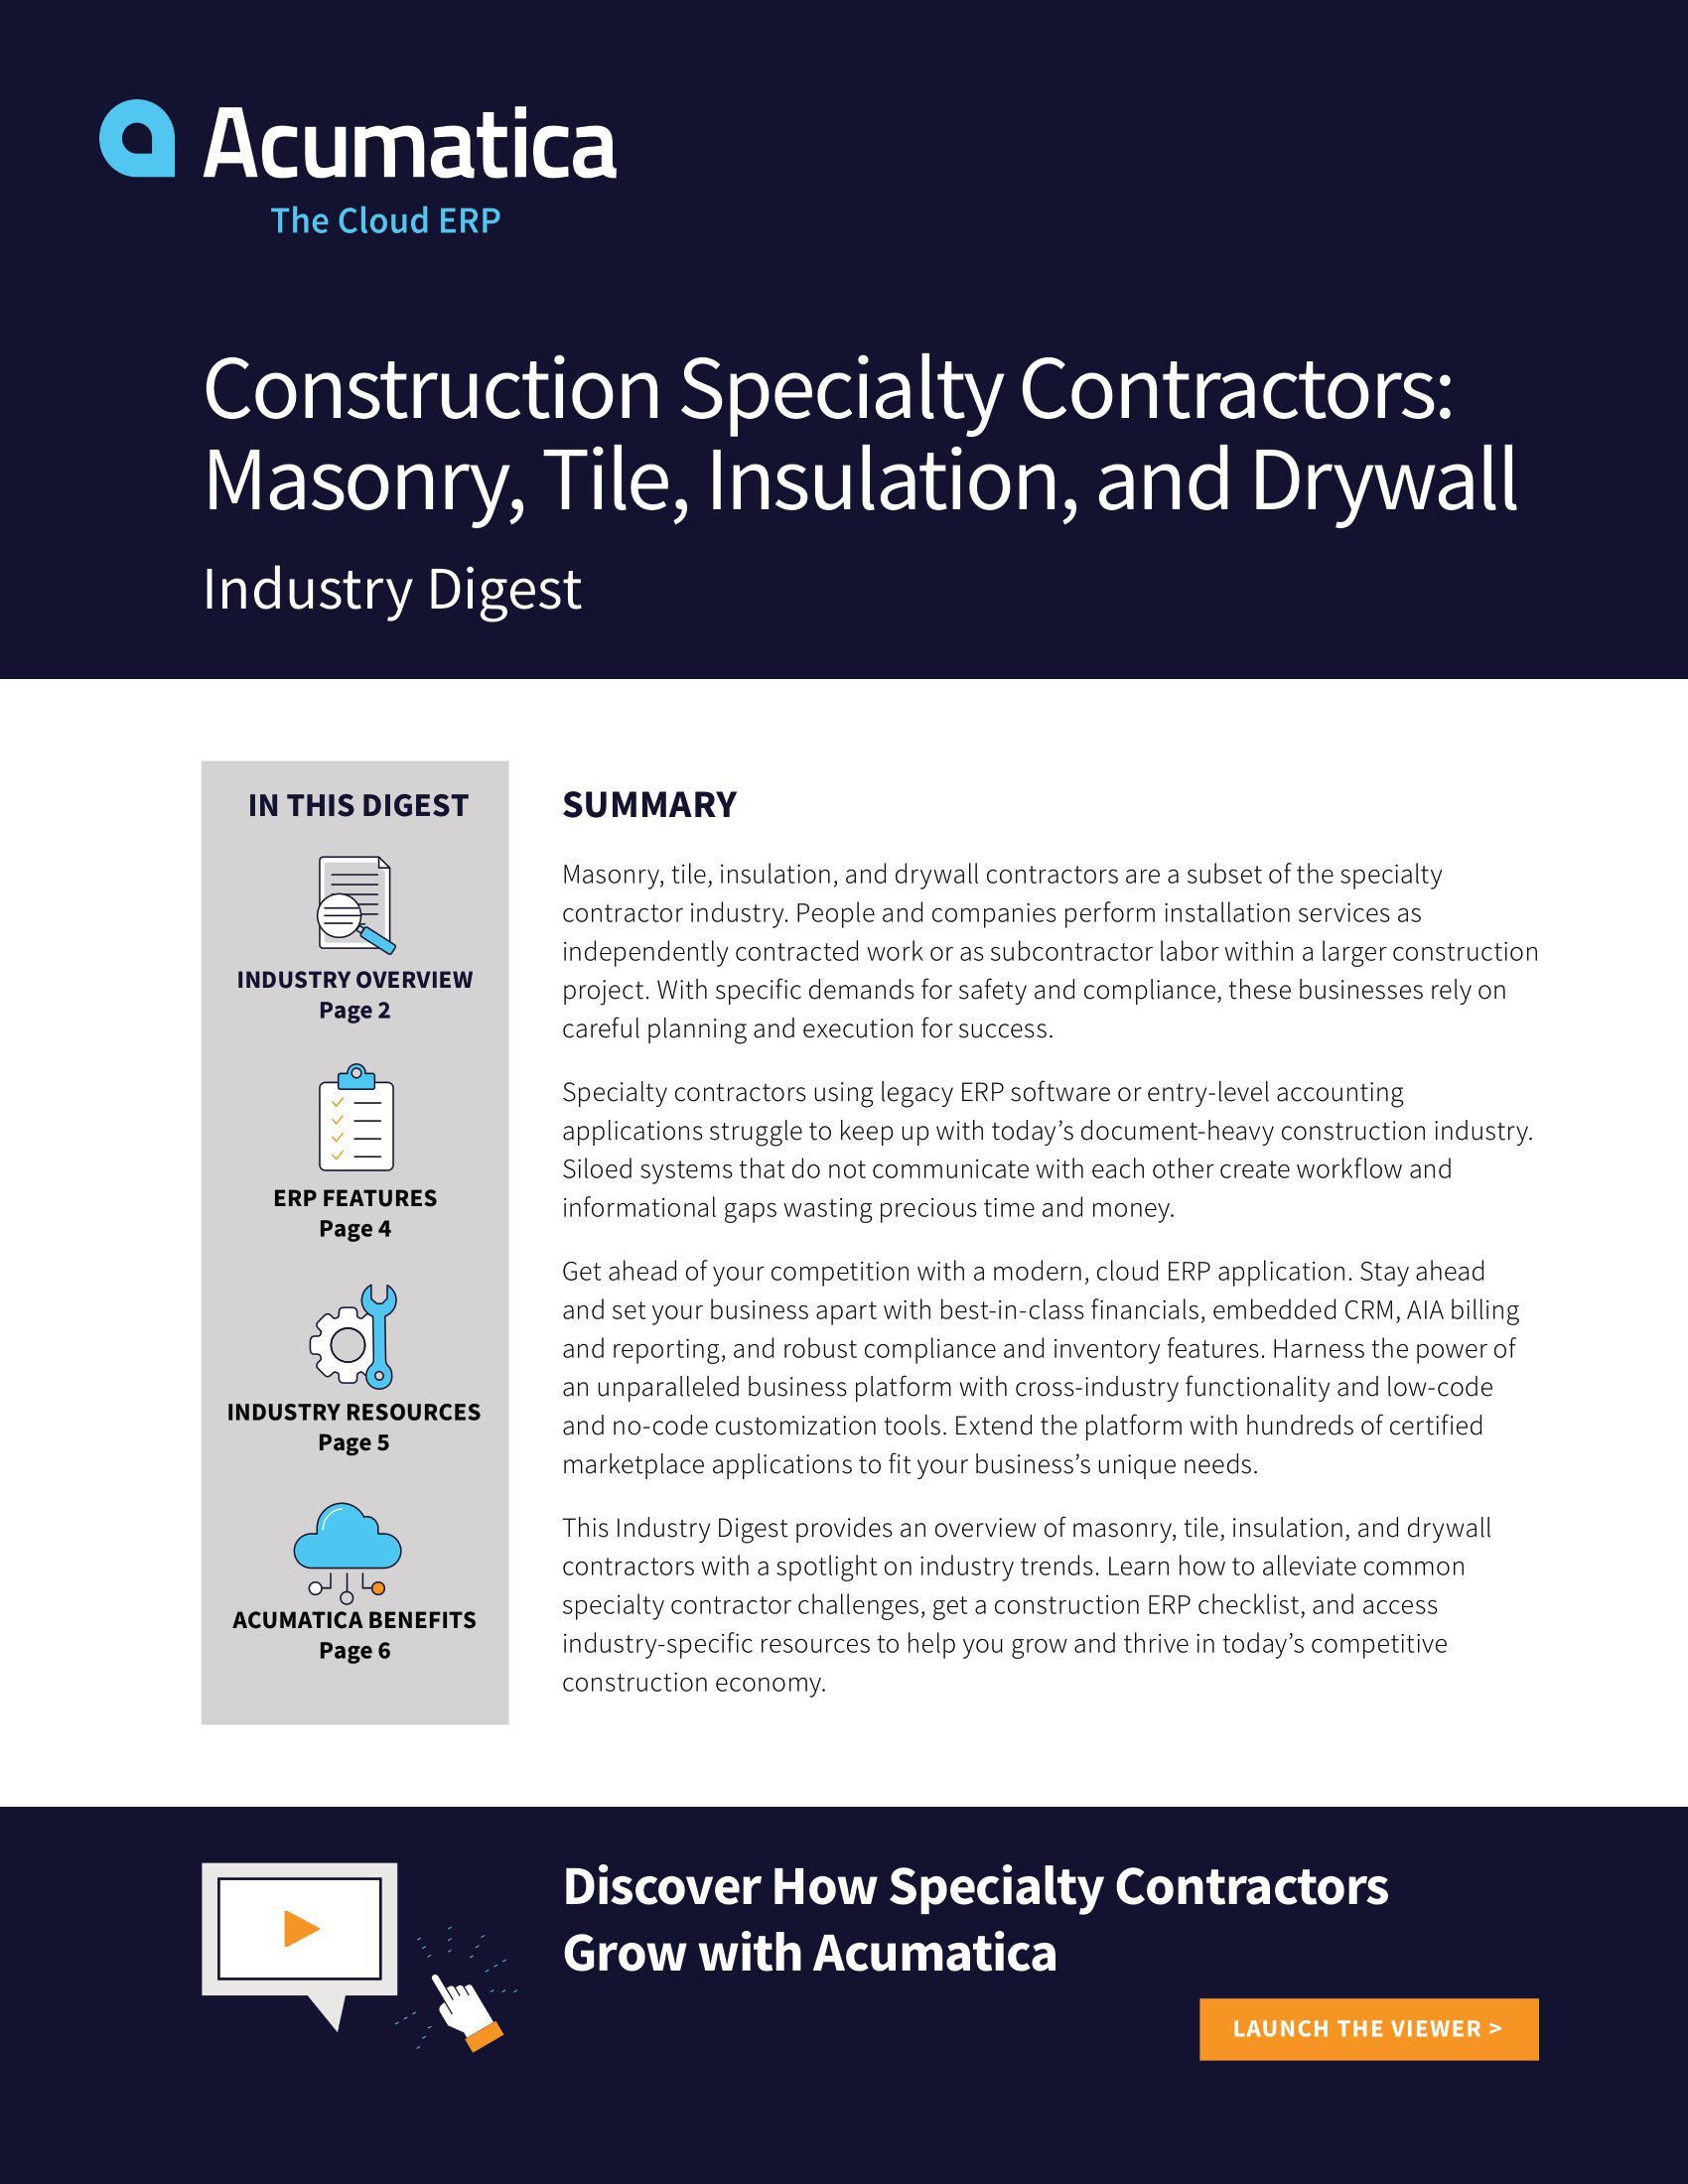 Acumatica Construction Edition: Transforming Specialty Contractor Businesses in Today’s Digital Economy, page 0